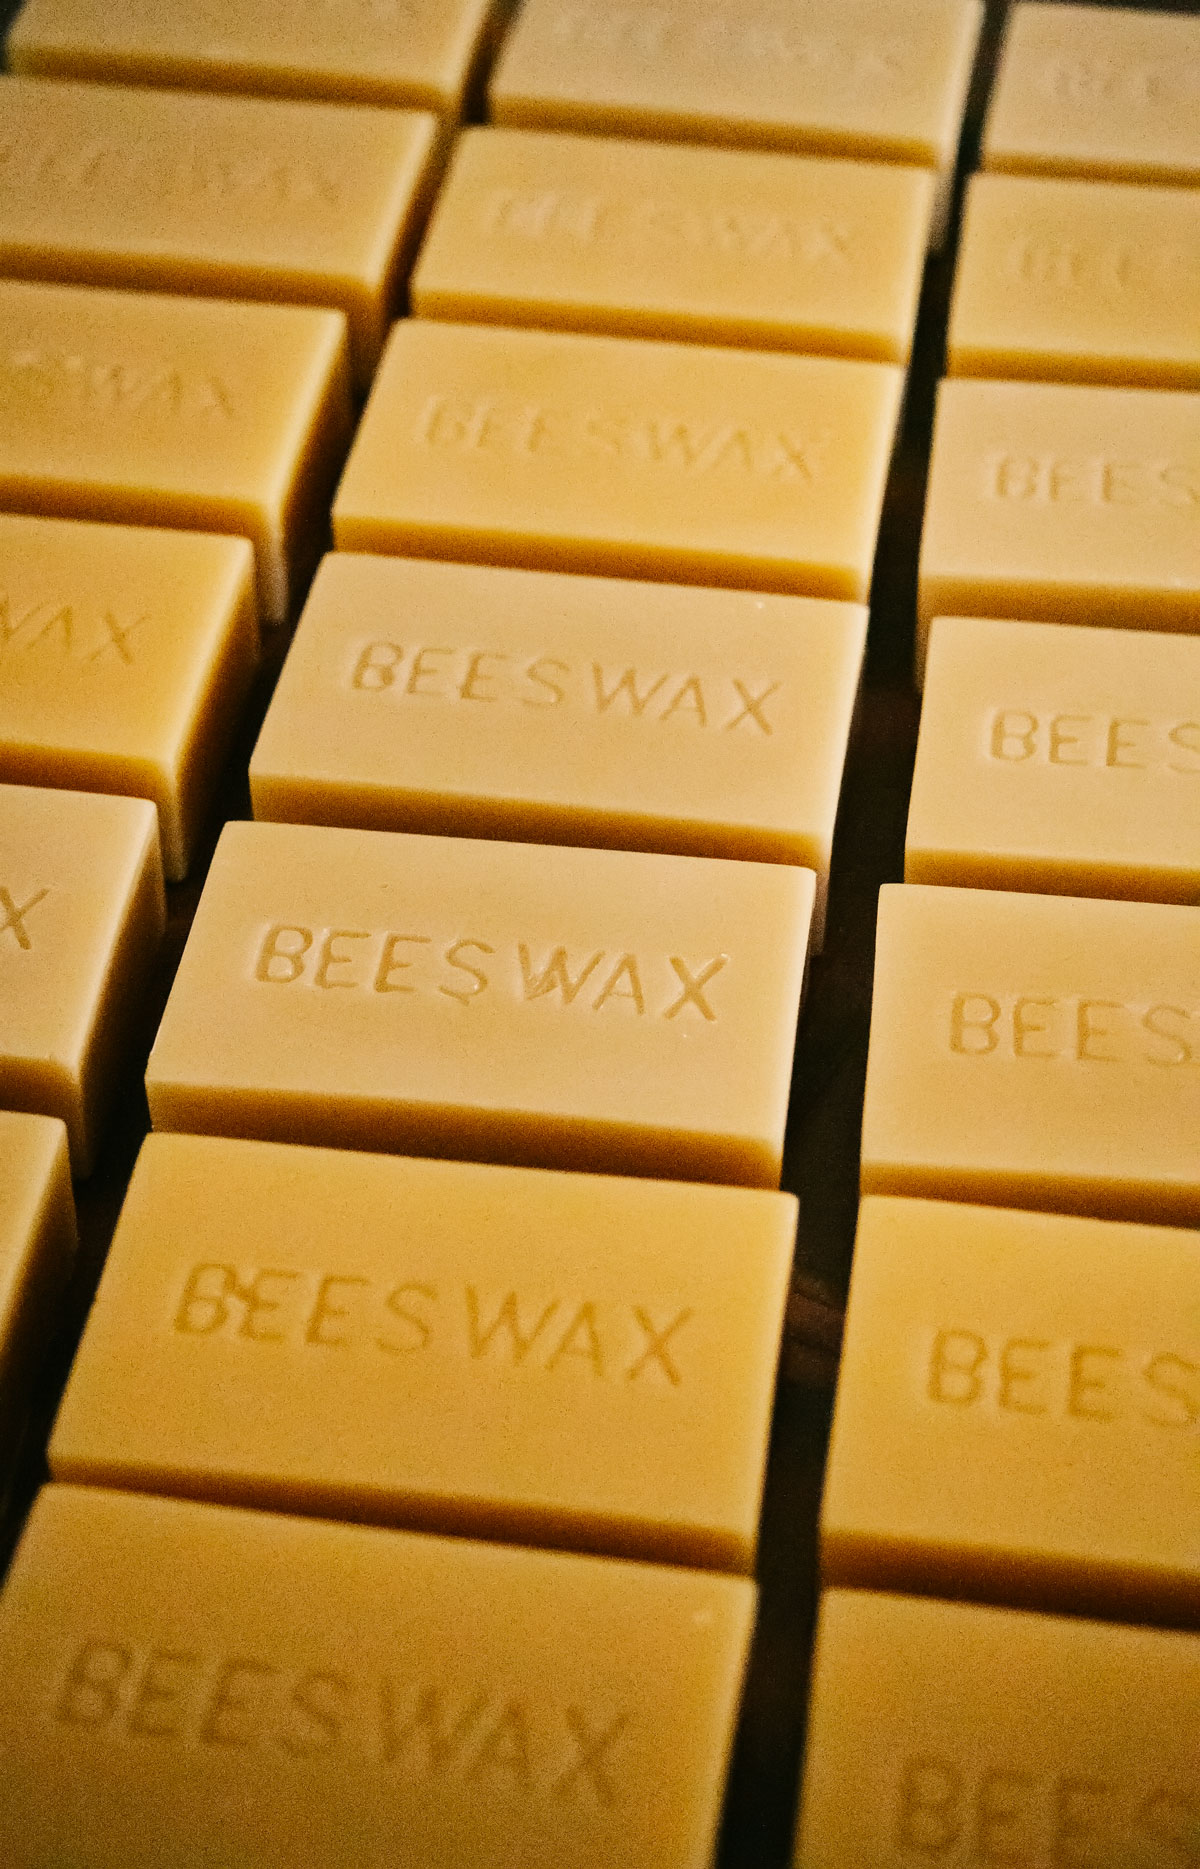 Pure Beeswax - Beeyond the Hive